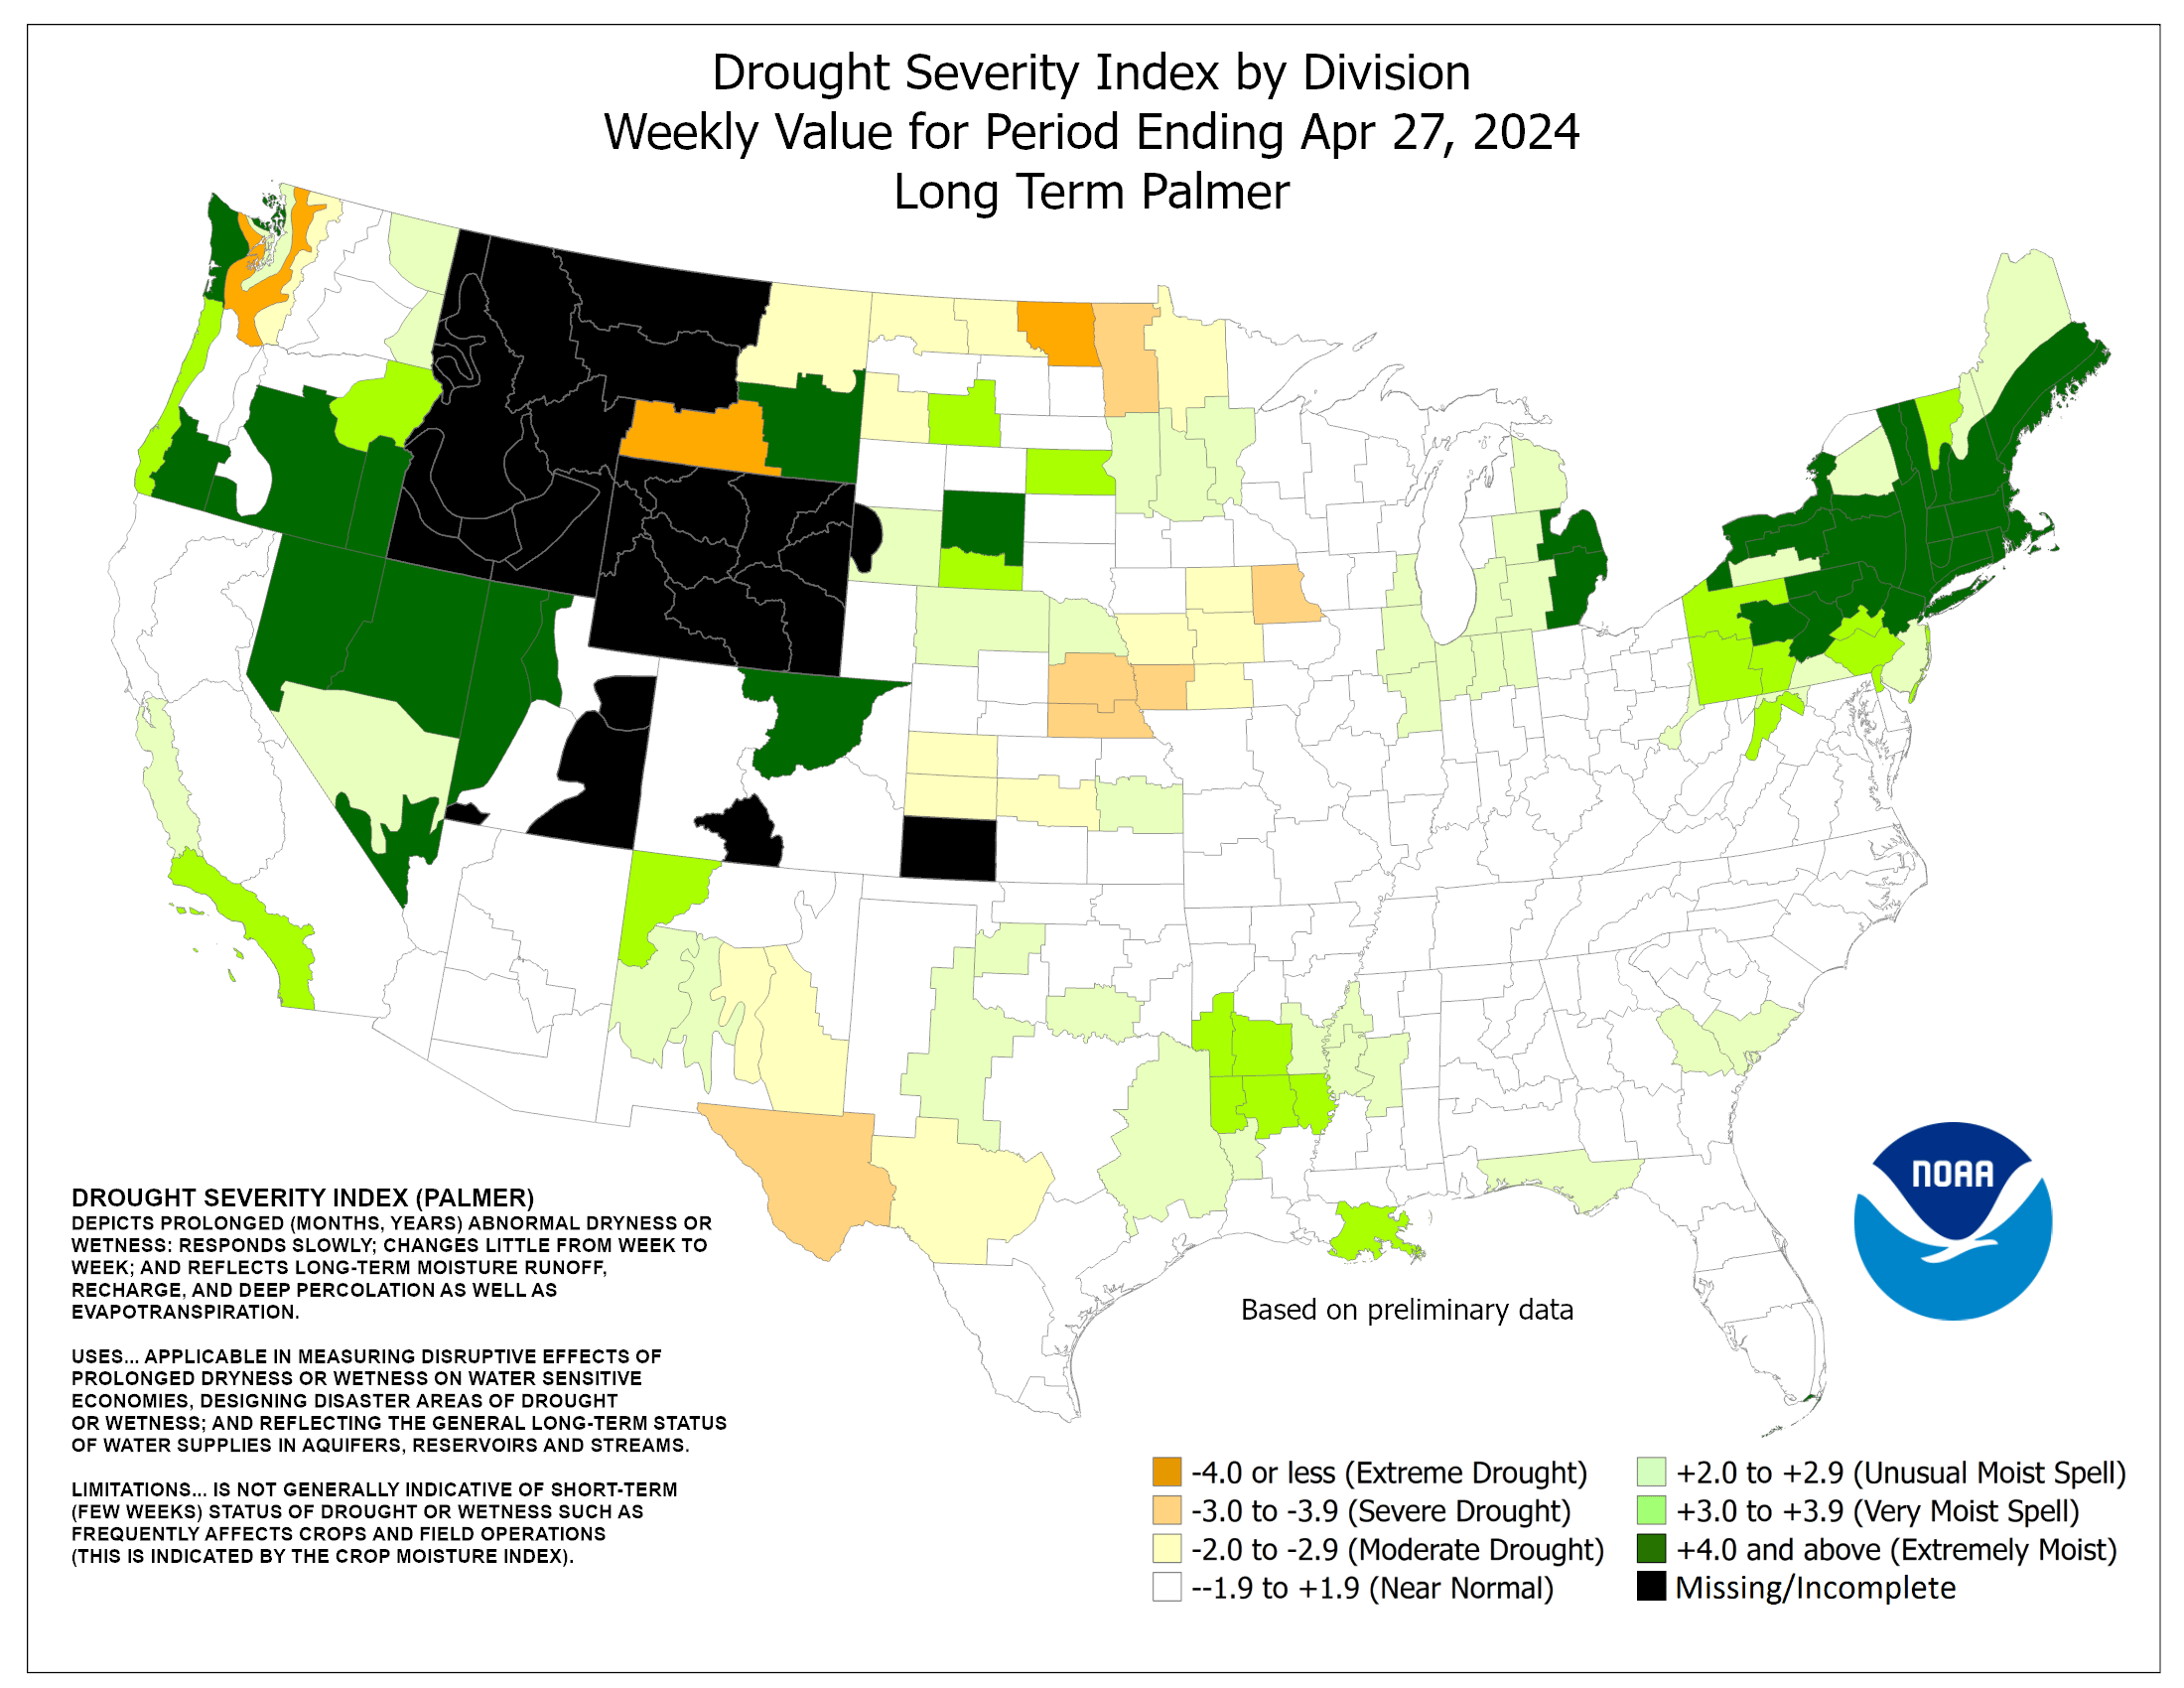 Drought severity index by division